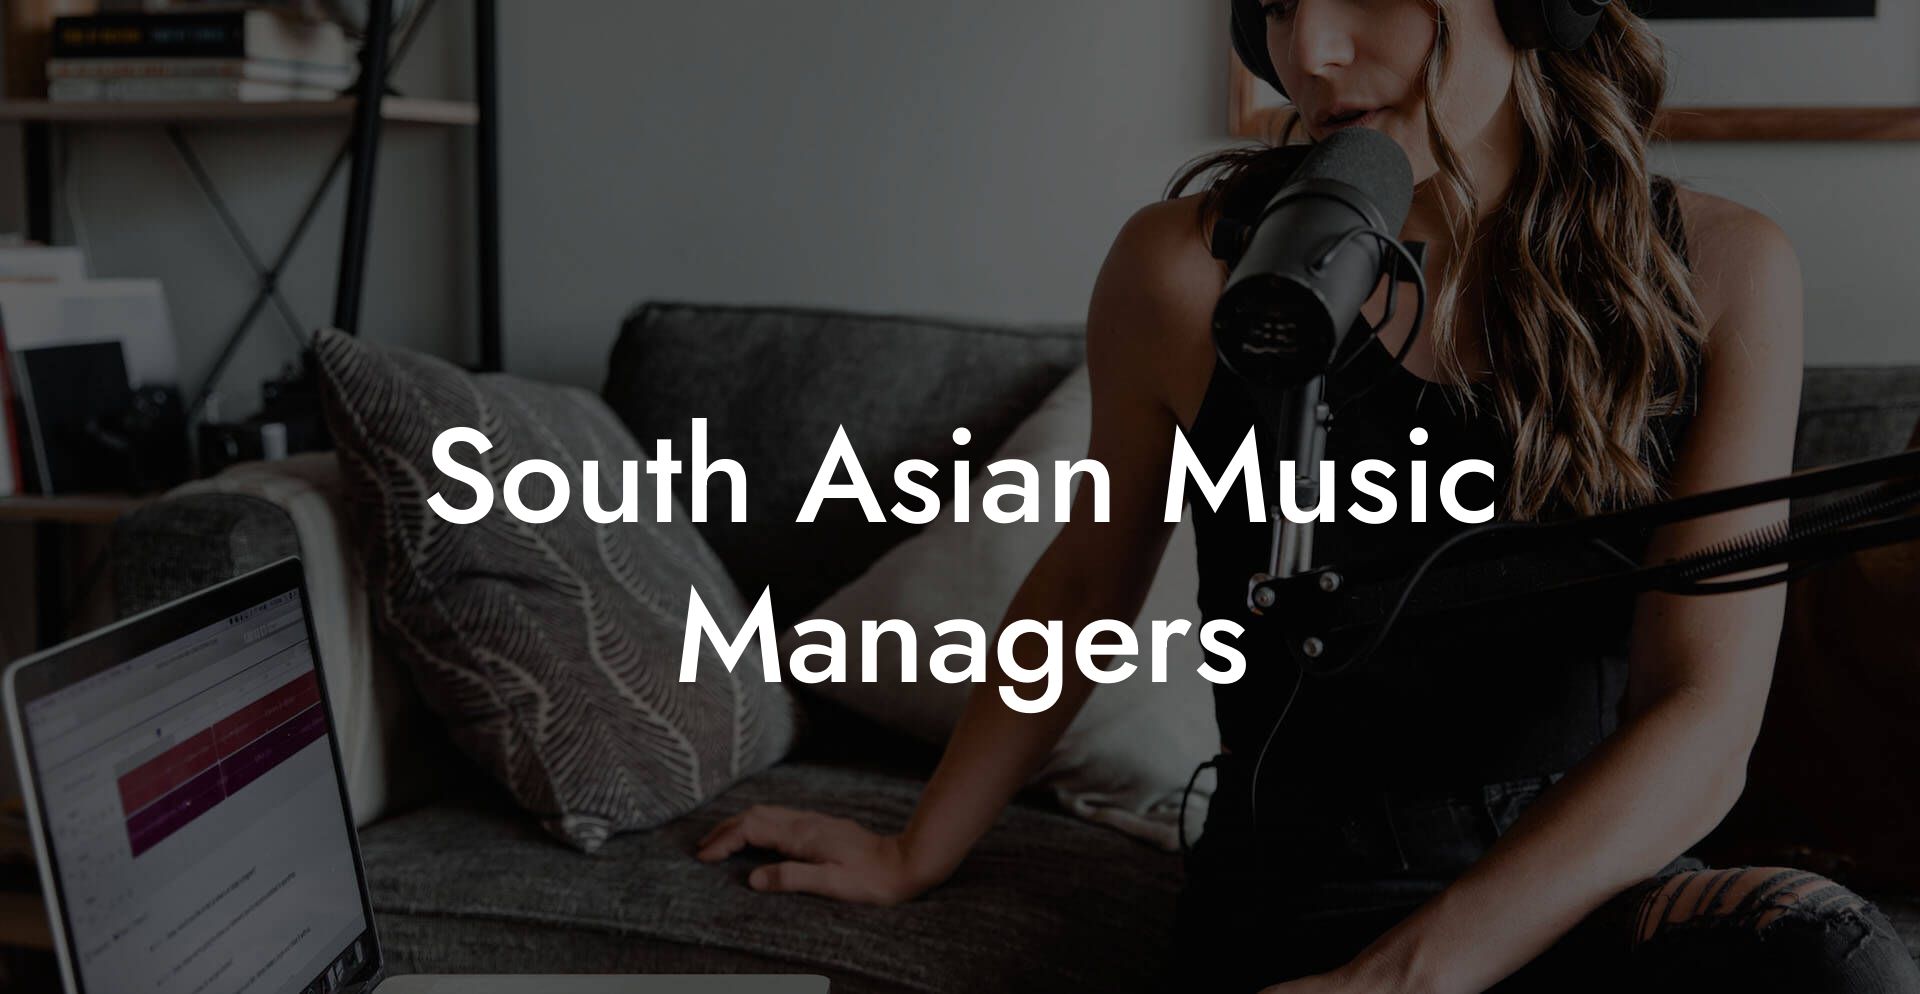 South Asian Music Managers